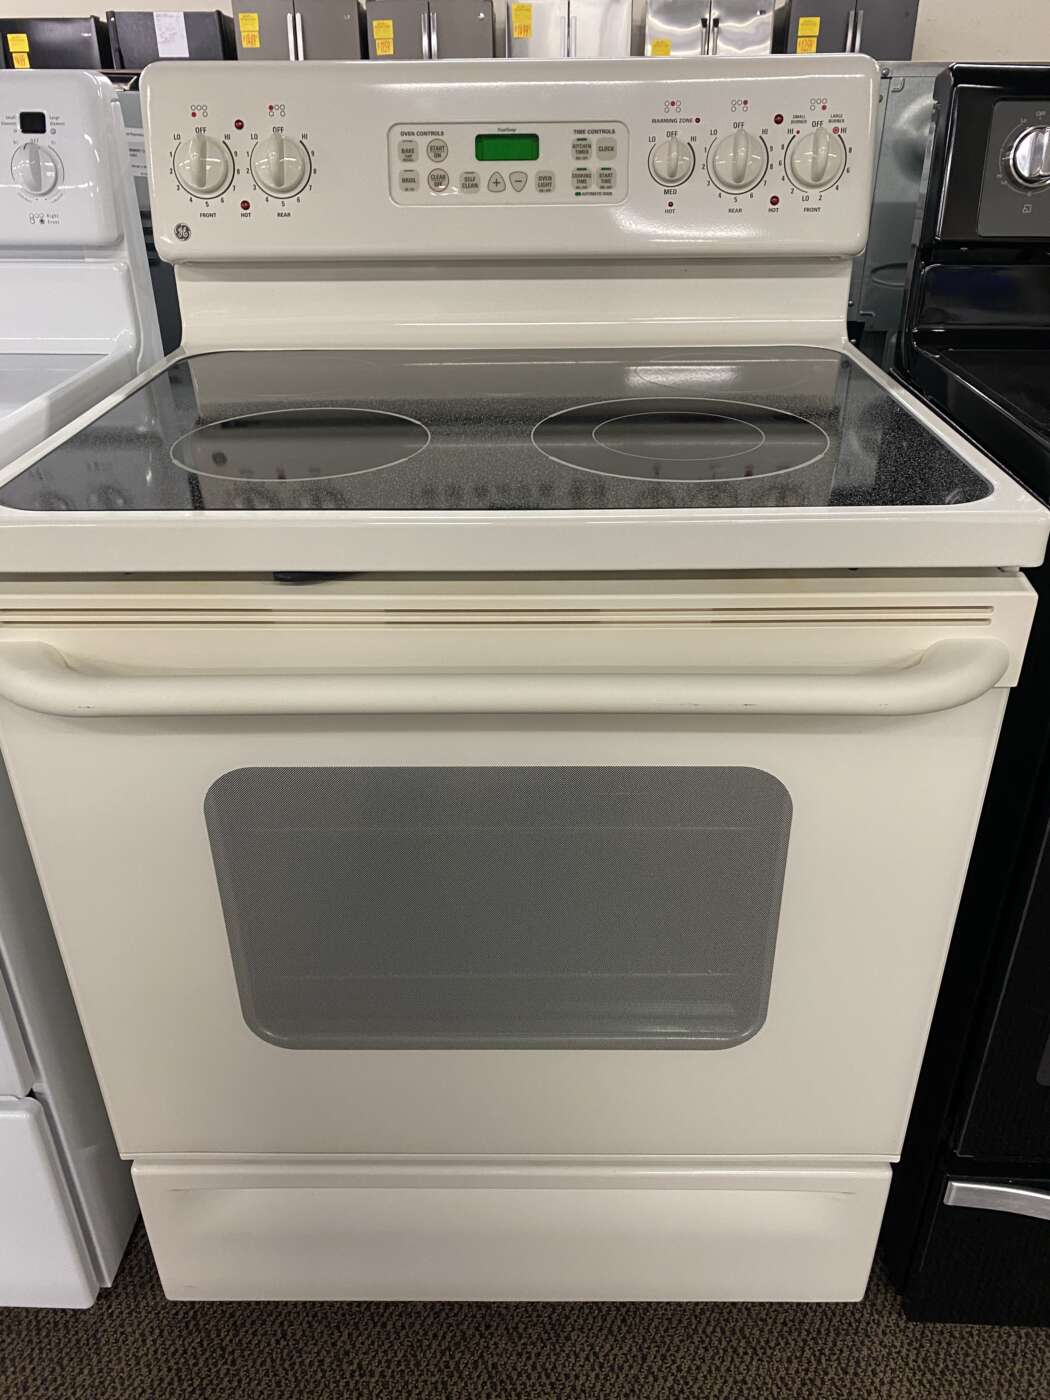 Reconditioned G/E Self-Clean Oven Electric Range – Bisque